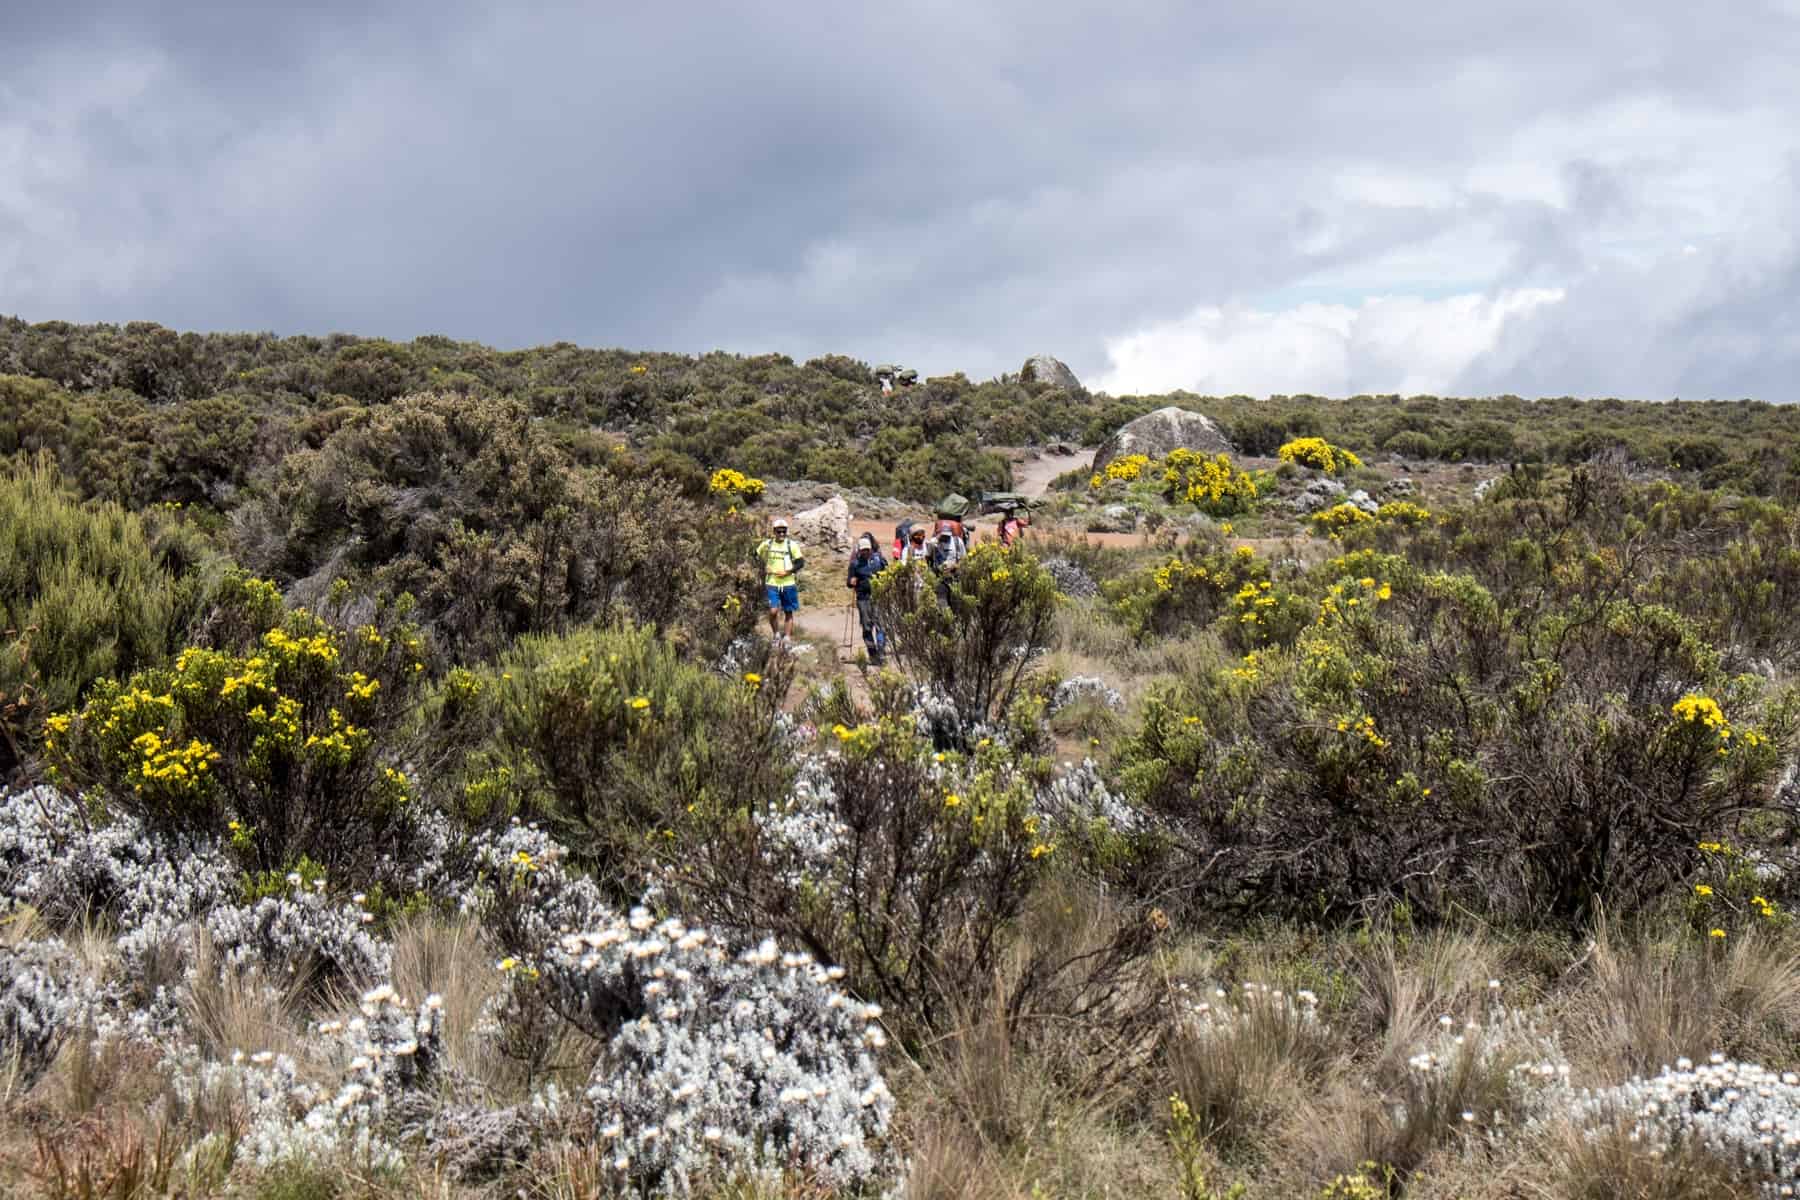 A small group of people trekking Kilimanjaro through a orange pathway through rocks, green bushes with yellow and wildflowers 